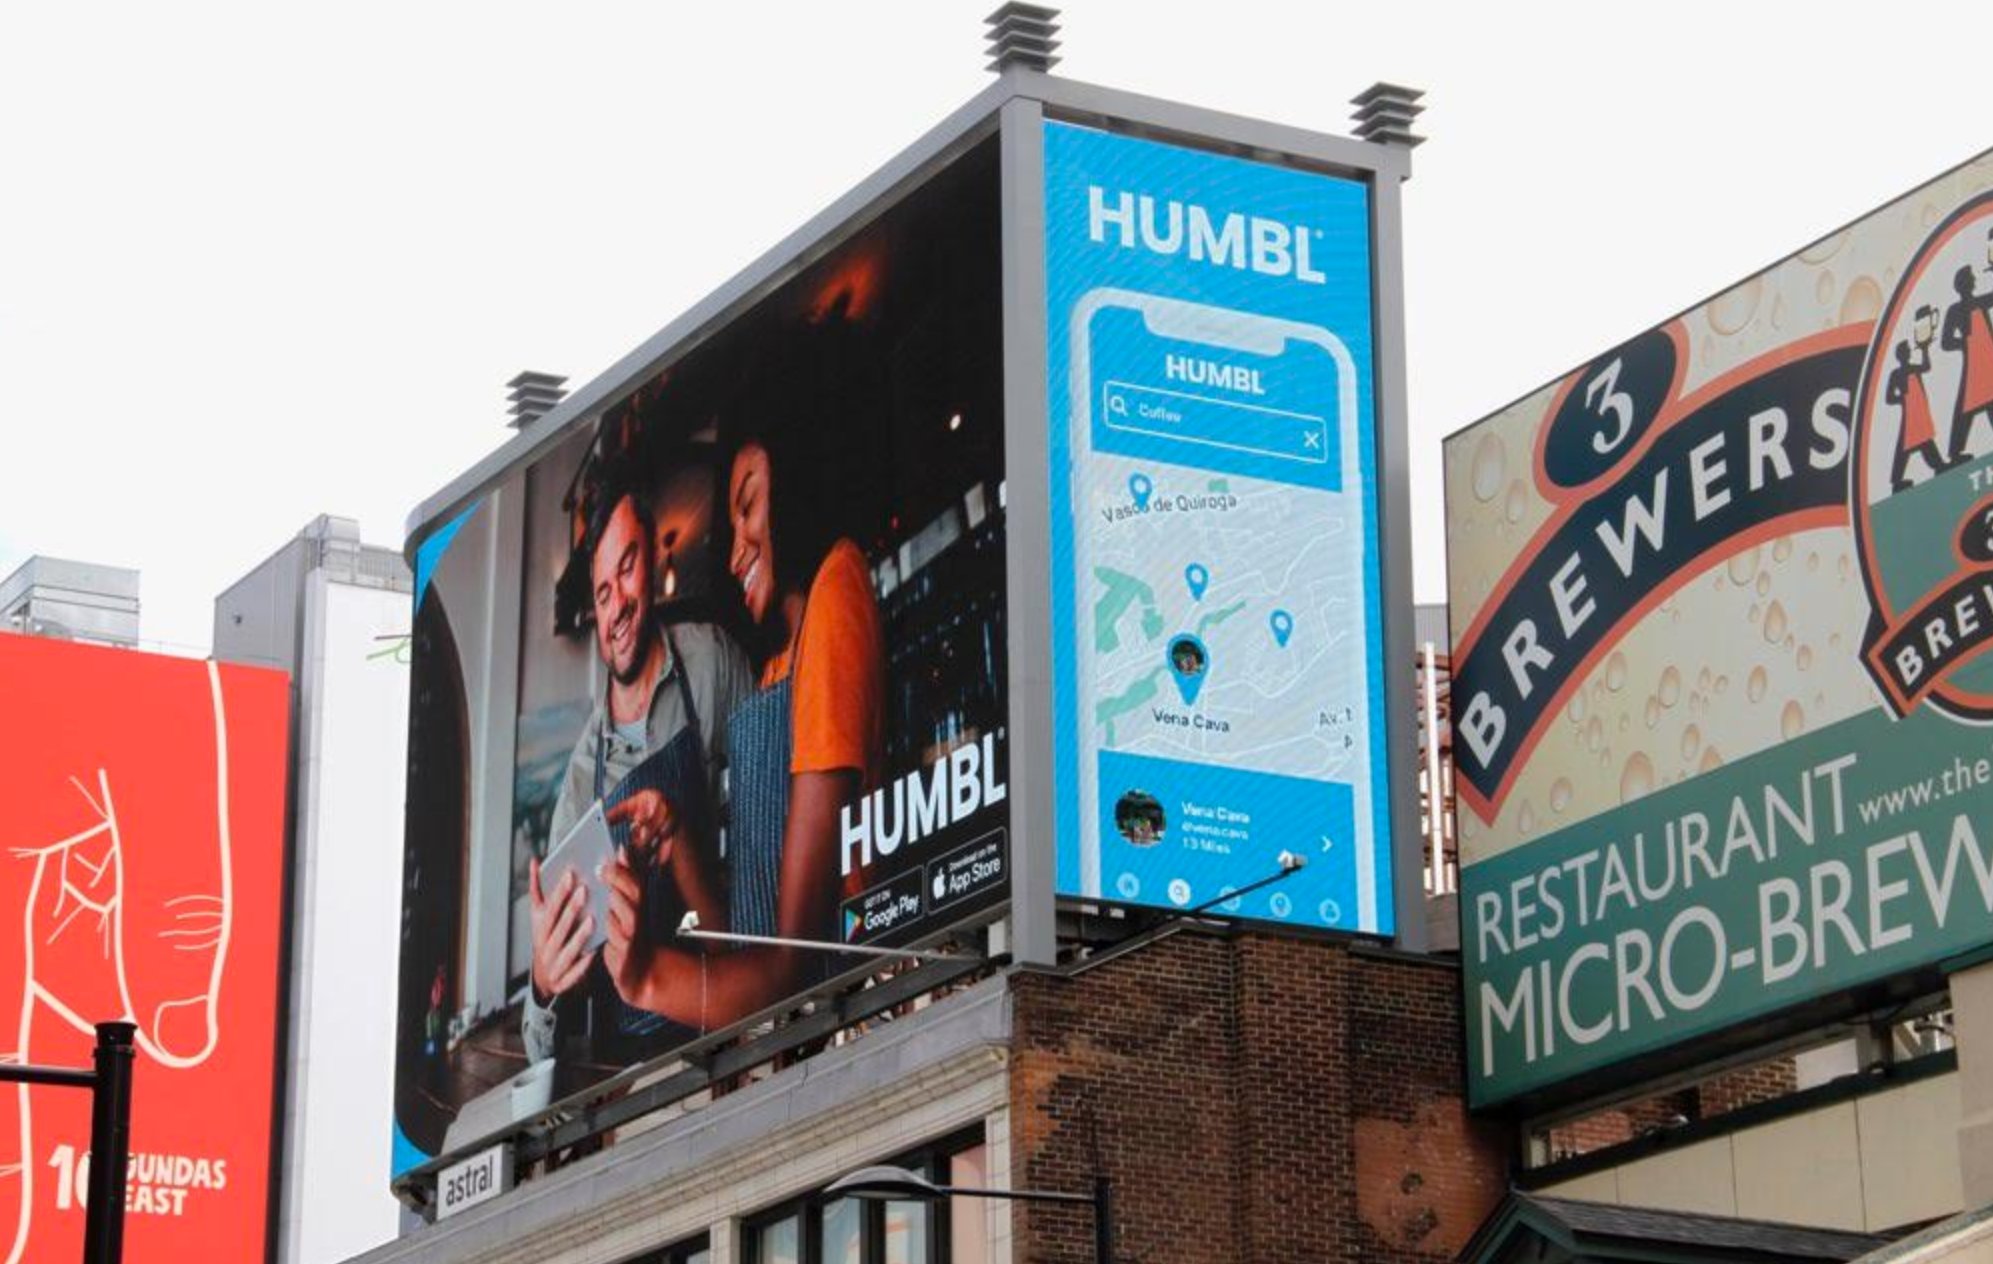 Brian Foote on Twitter "Cool seeing all this HUMBL outdoor going up